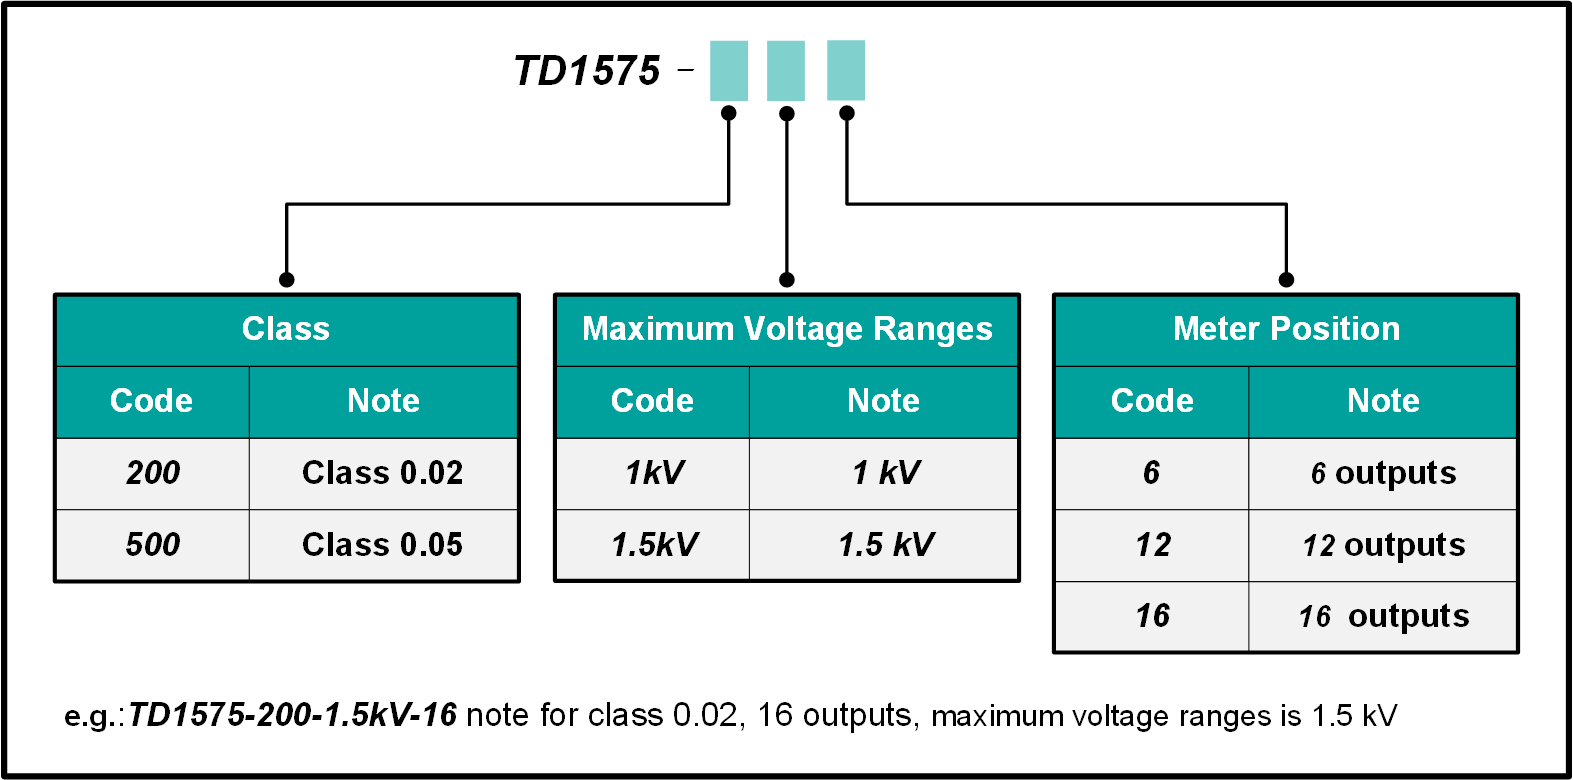 TD1575 Verification Apparatus for DC Energy Meters Ordering Information